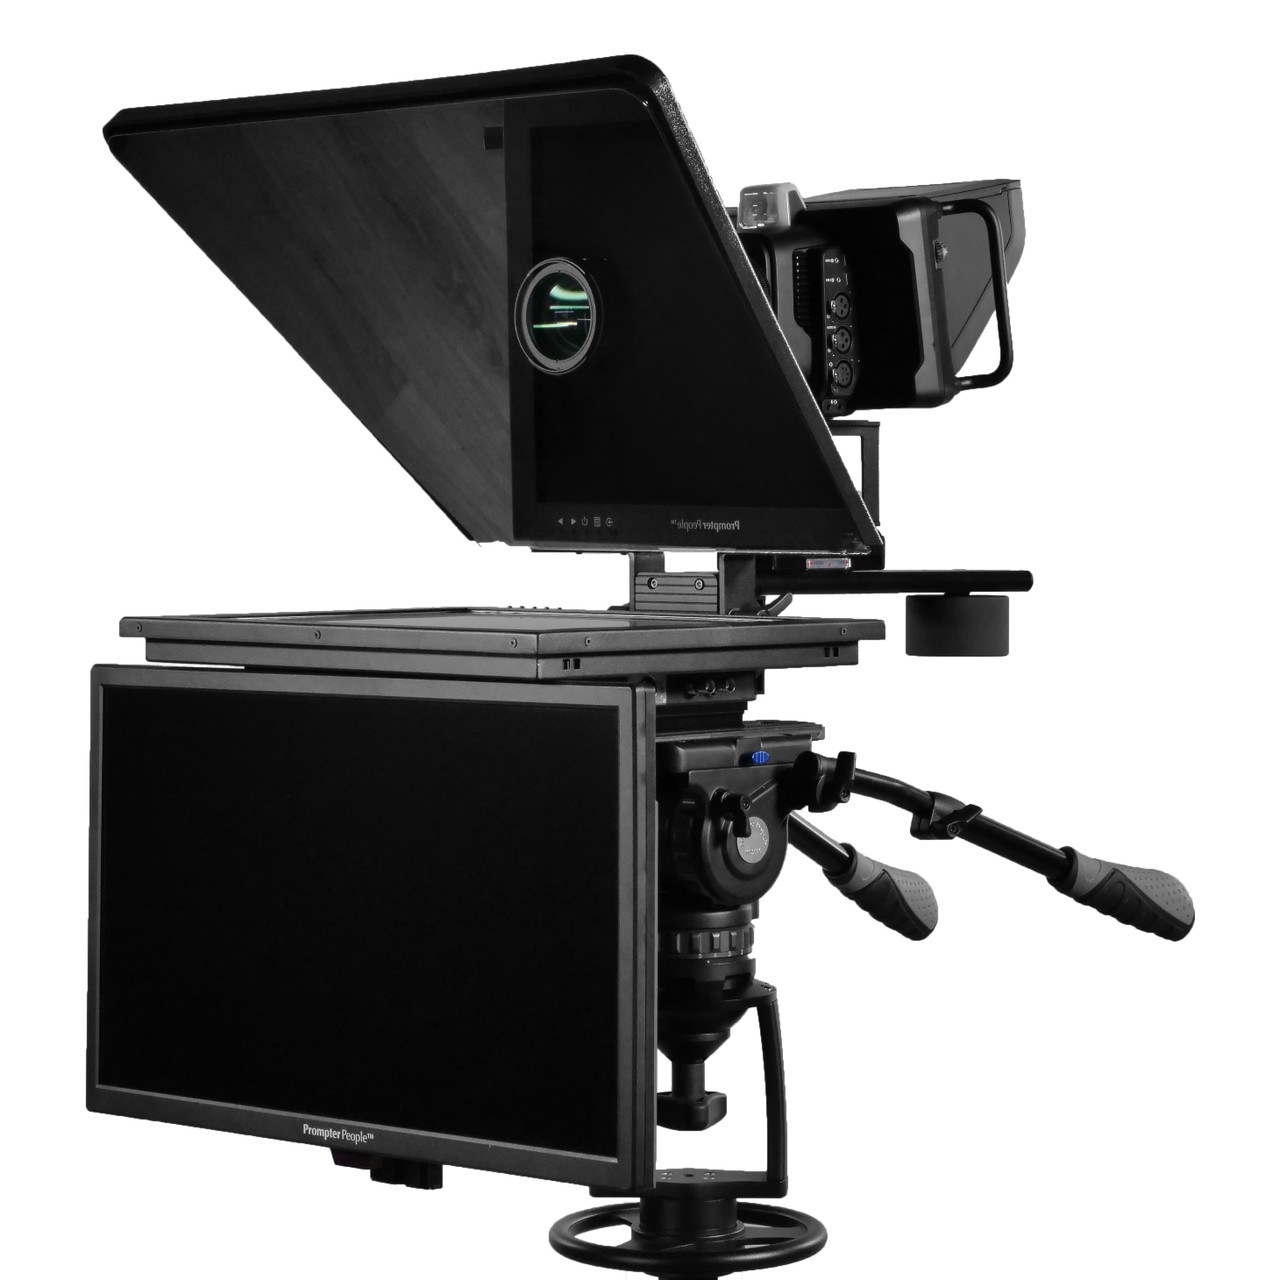 Flex Plus Talent Monitor Teleprompter | 17" 1000 NIT High Bright Prompting Monitor 3G-SDI | HDMI | VGA with 21.5" Color Accurate RGB IPS 3G-SDI Talent Monitor